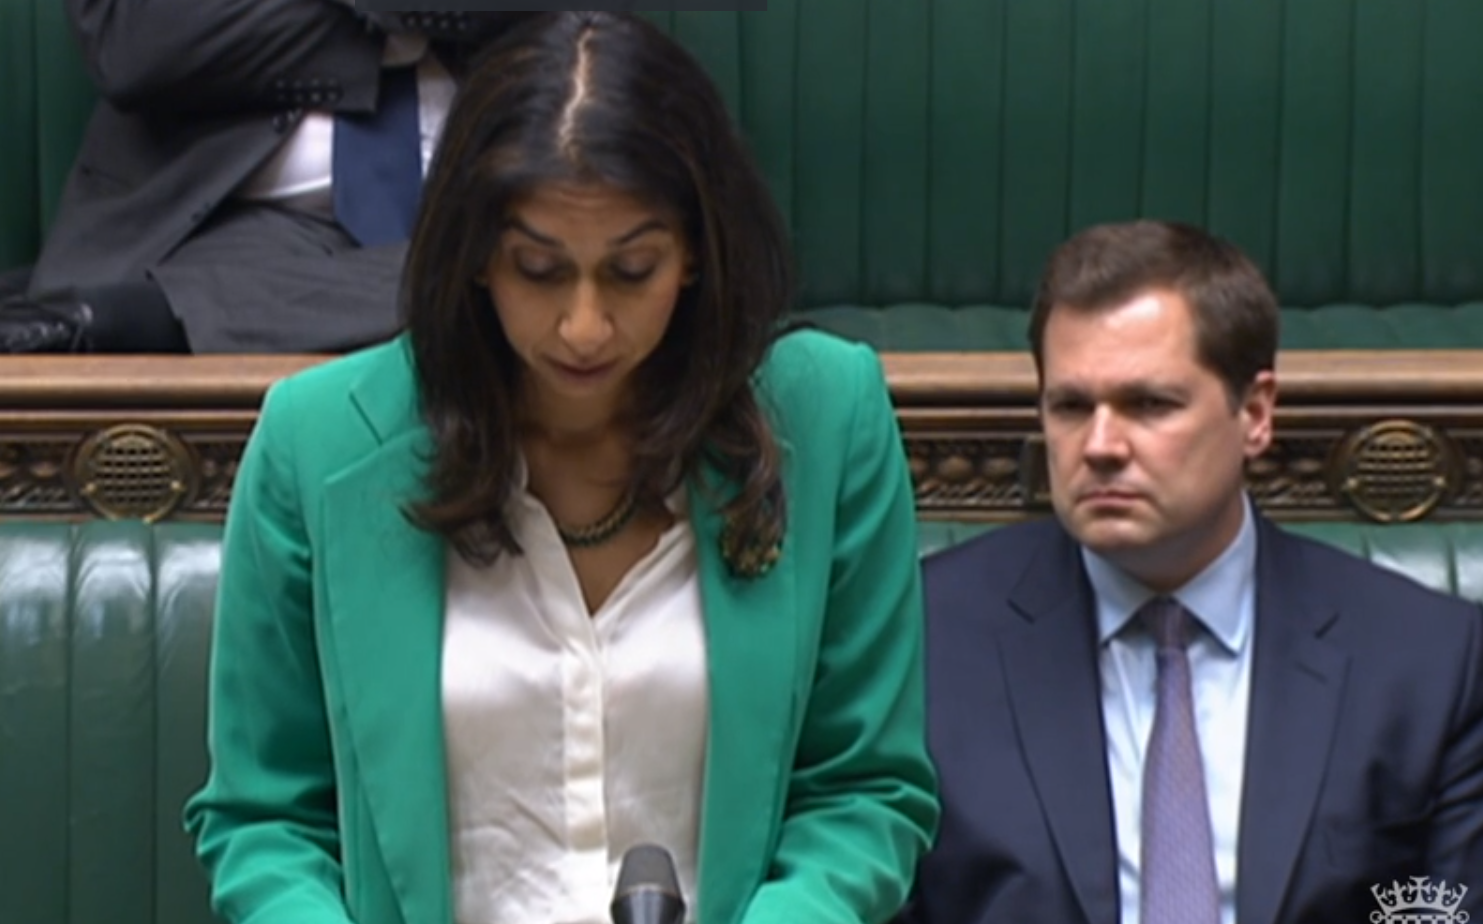 Suella Braverman doubled down on her support for the plan in the Commons despite the ruling